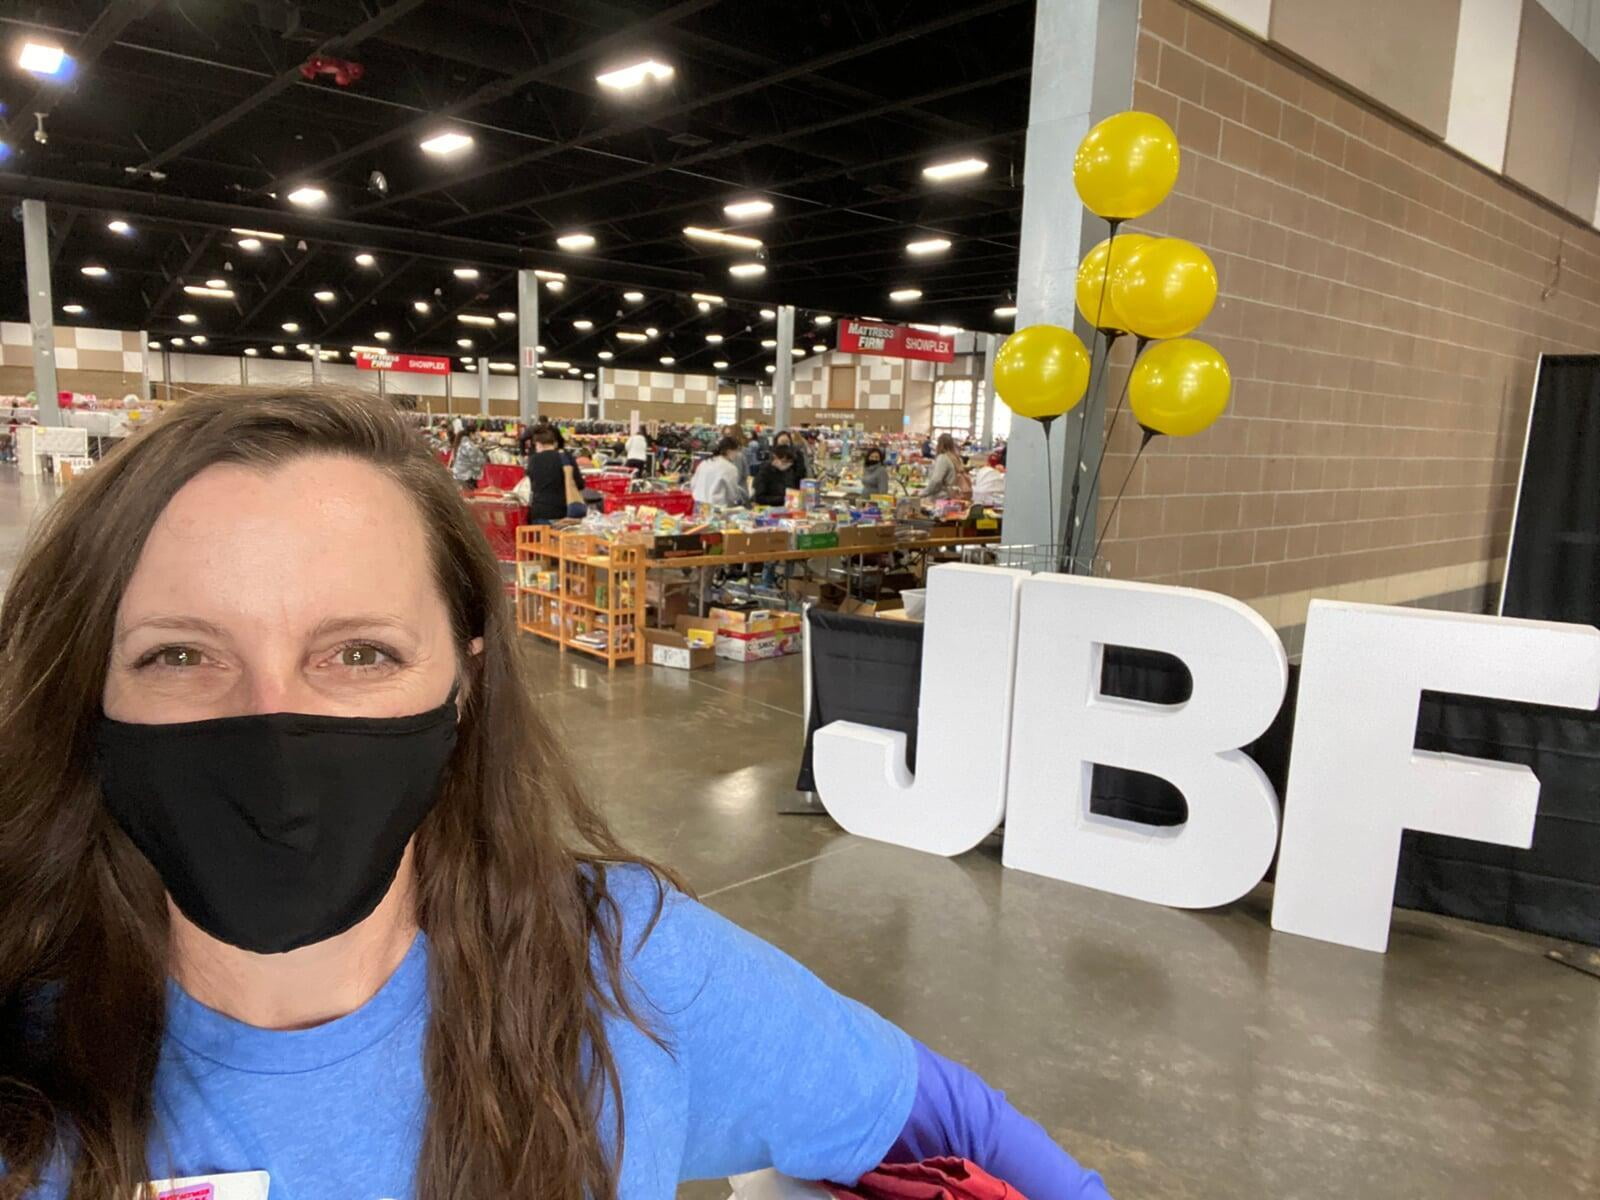 Owner/Operator, Allison Stephens, wears a face mask smiling at the cameral standing in front of the expansive sales floor with large JBF letters and yellow balloons in the background. Photo taken in 2020.